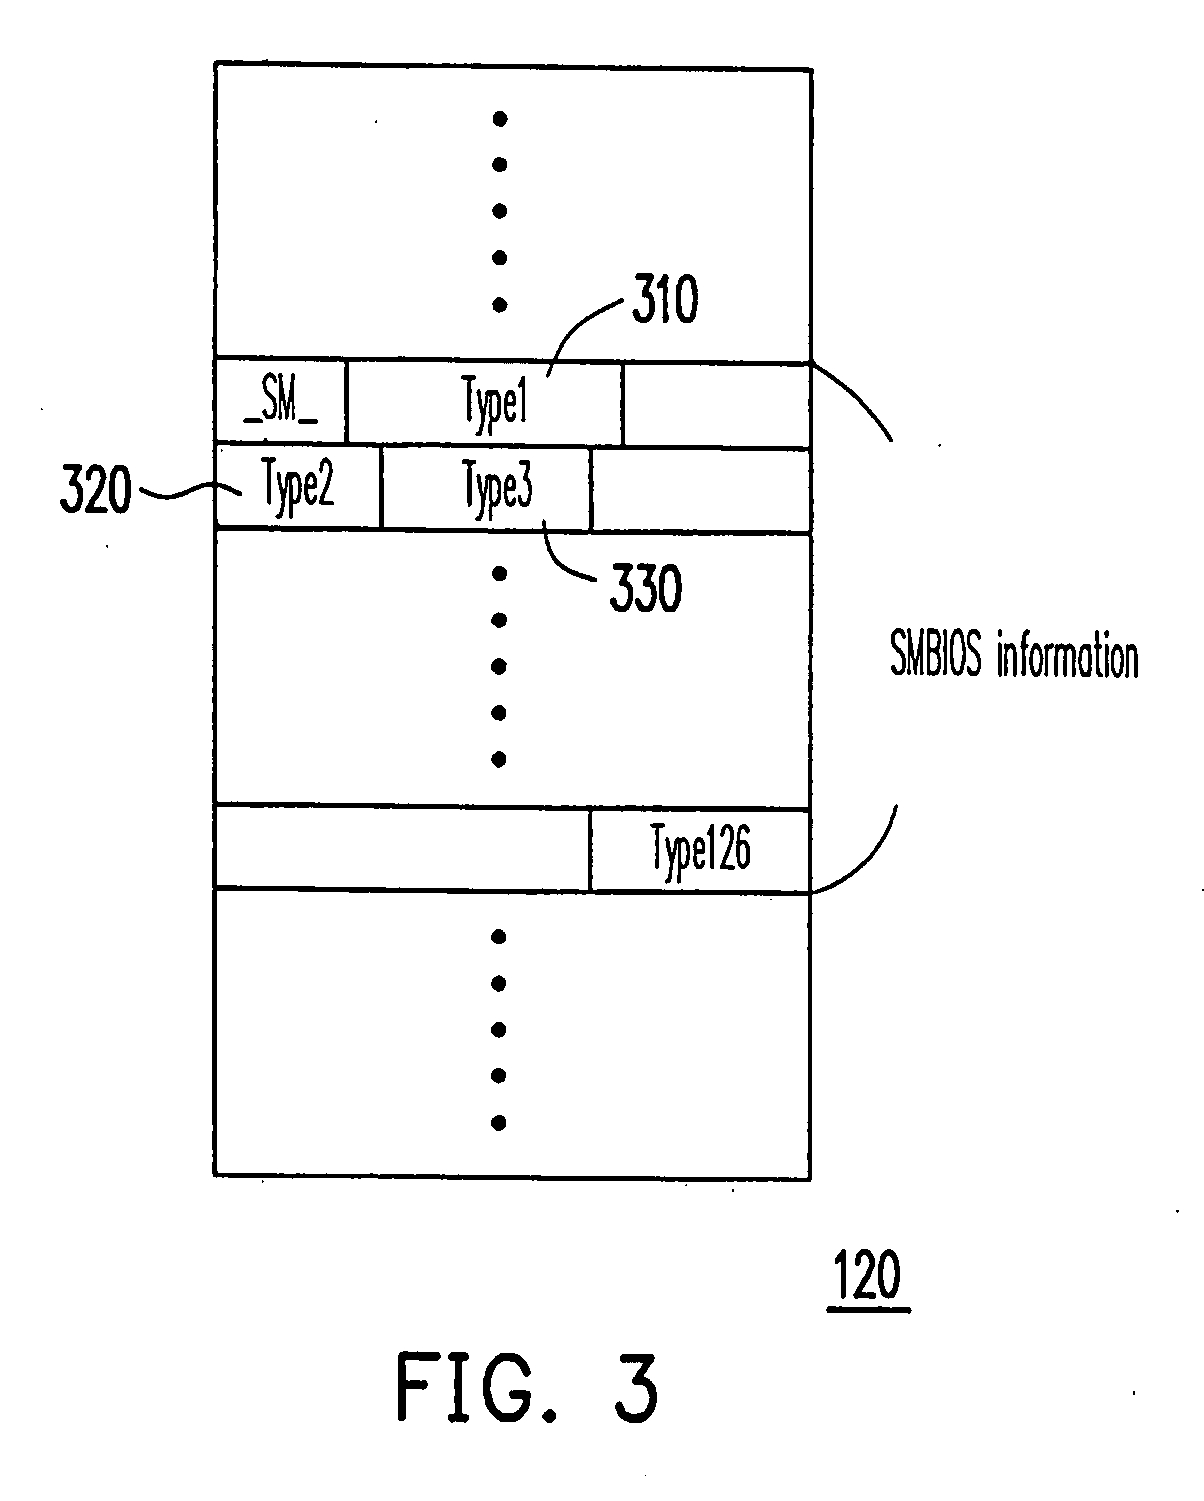 Method for executing power on self test on a computer system and updating SMBIOS information partially